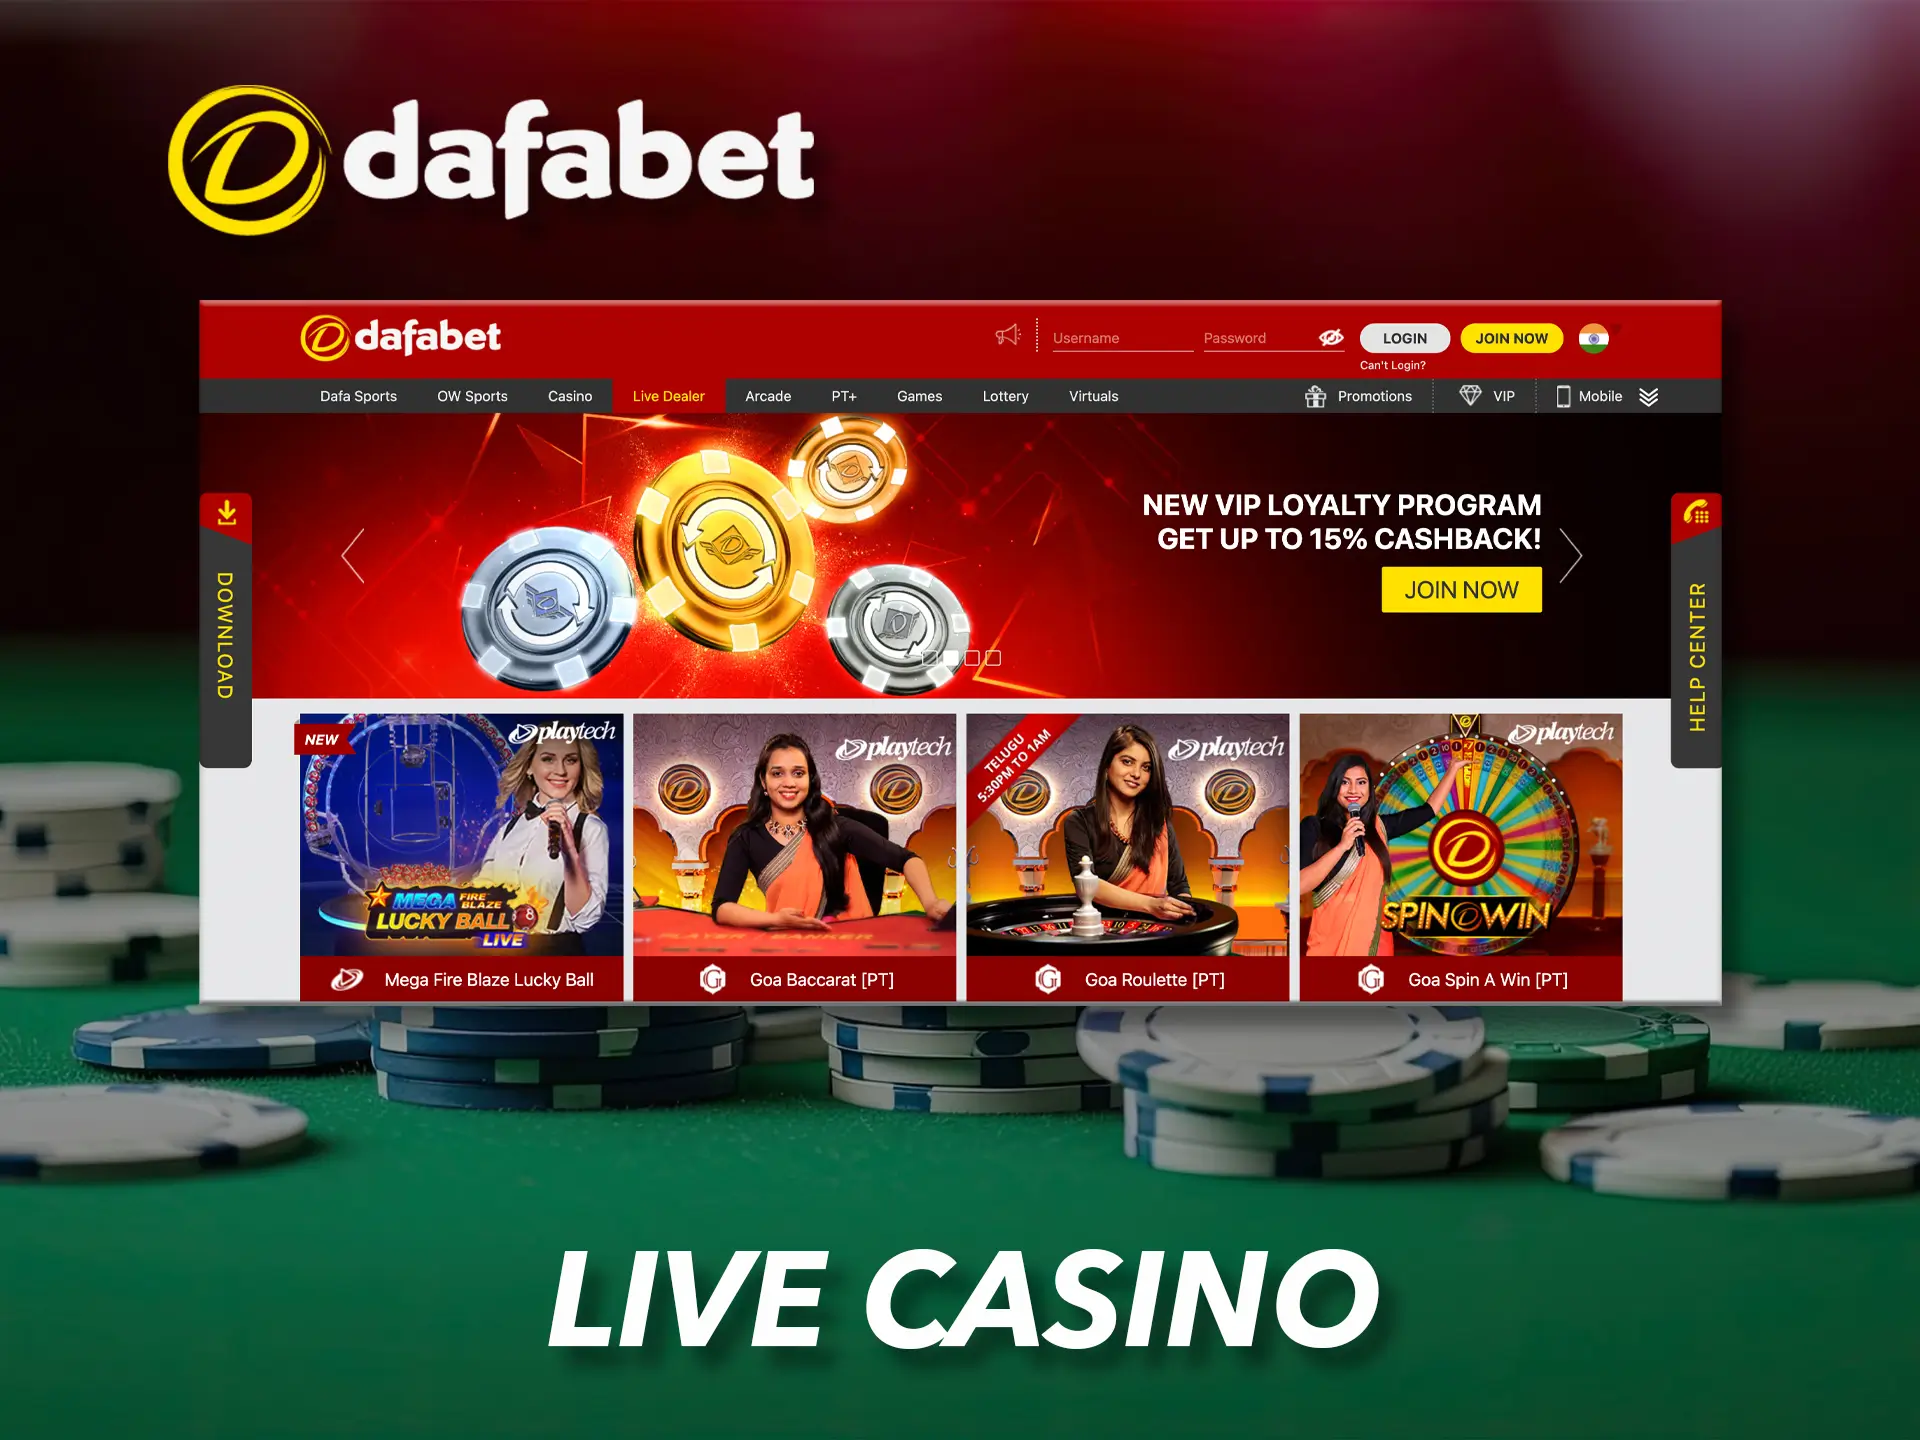 Dafabet is waiting for its customers in the best live casino games.